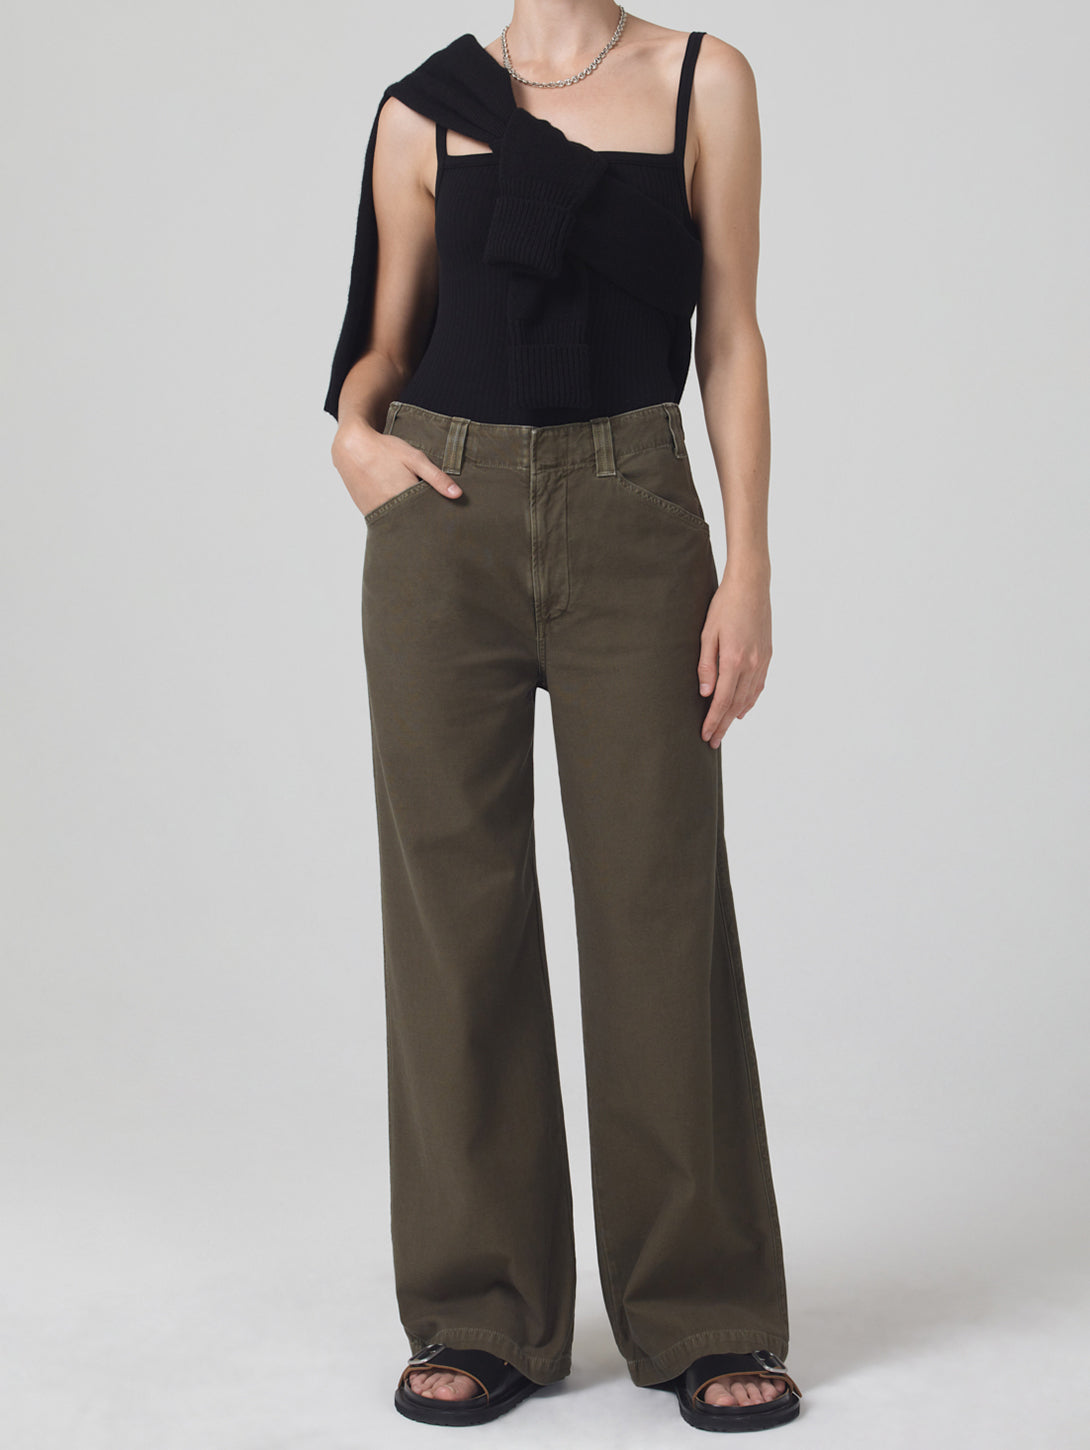 CITIZENS OF HUMANITY | Paloma Utility Pant - Tea Leaf | Over the ...